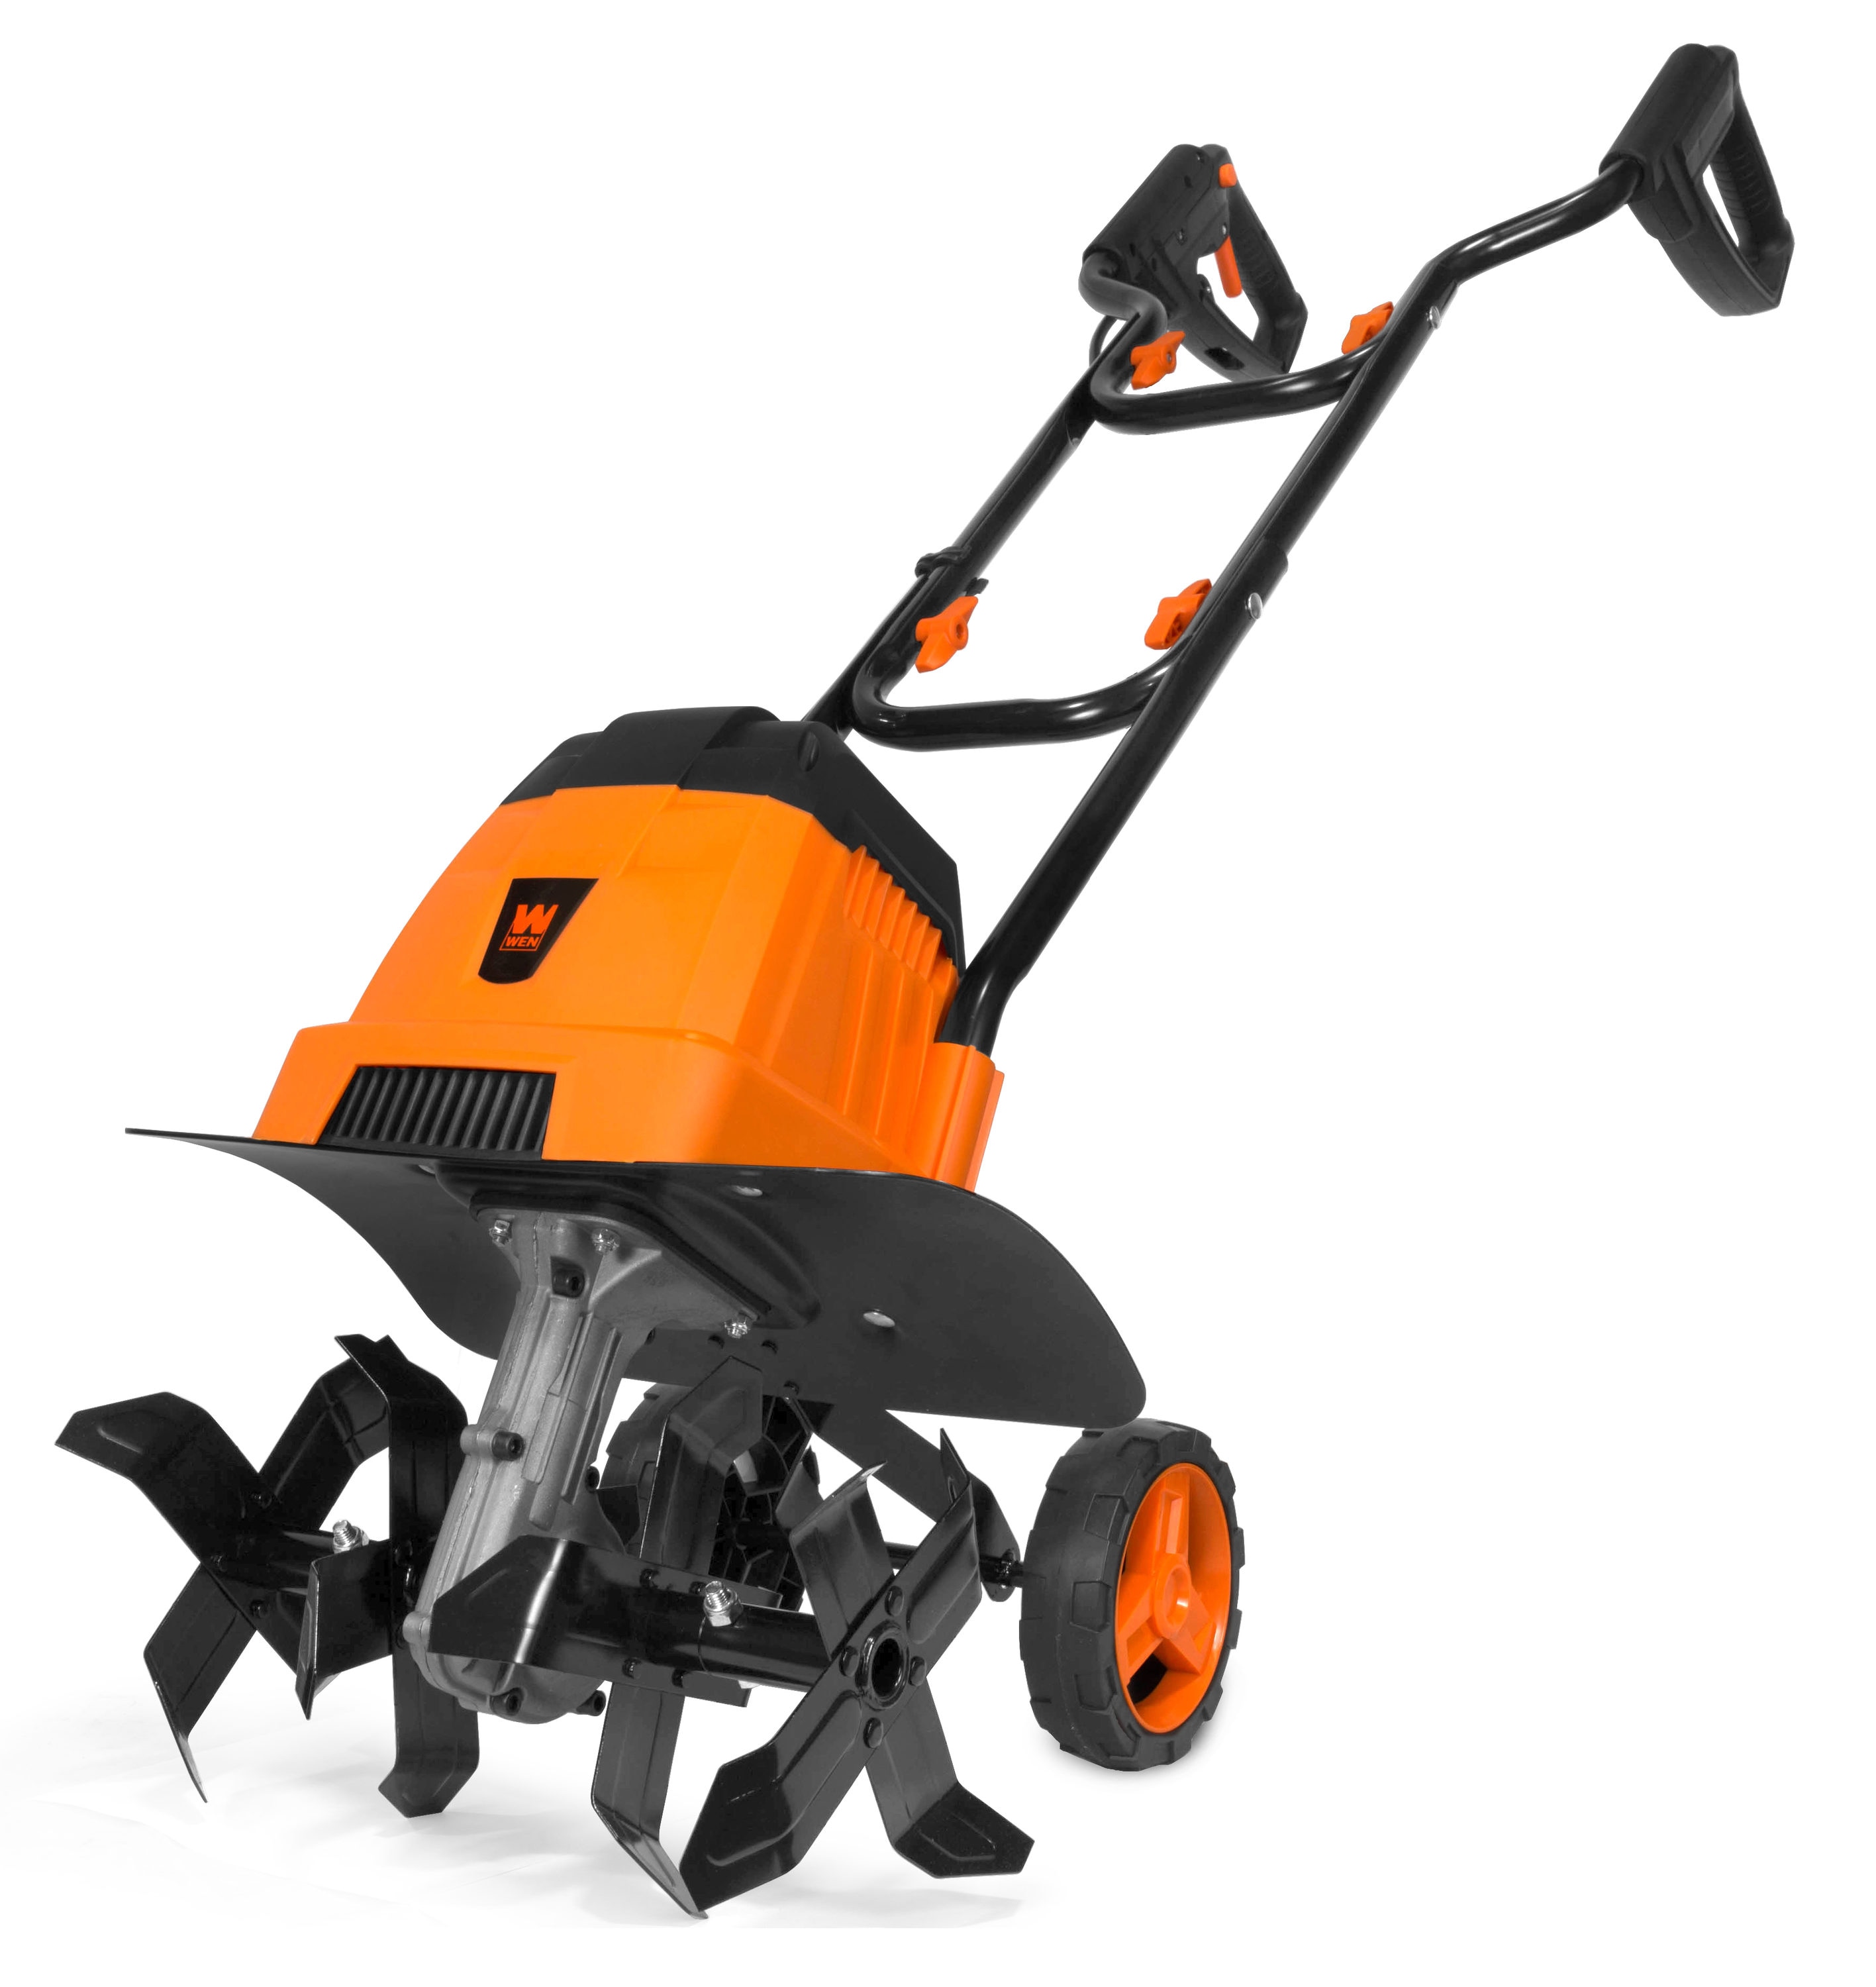 Rotating Corded Electric Cultivator